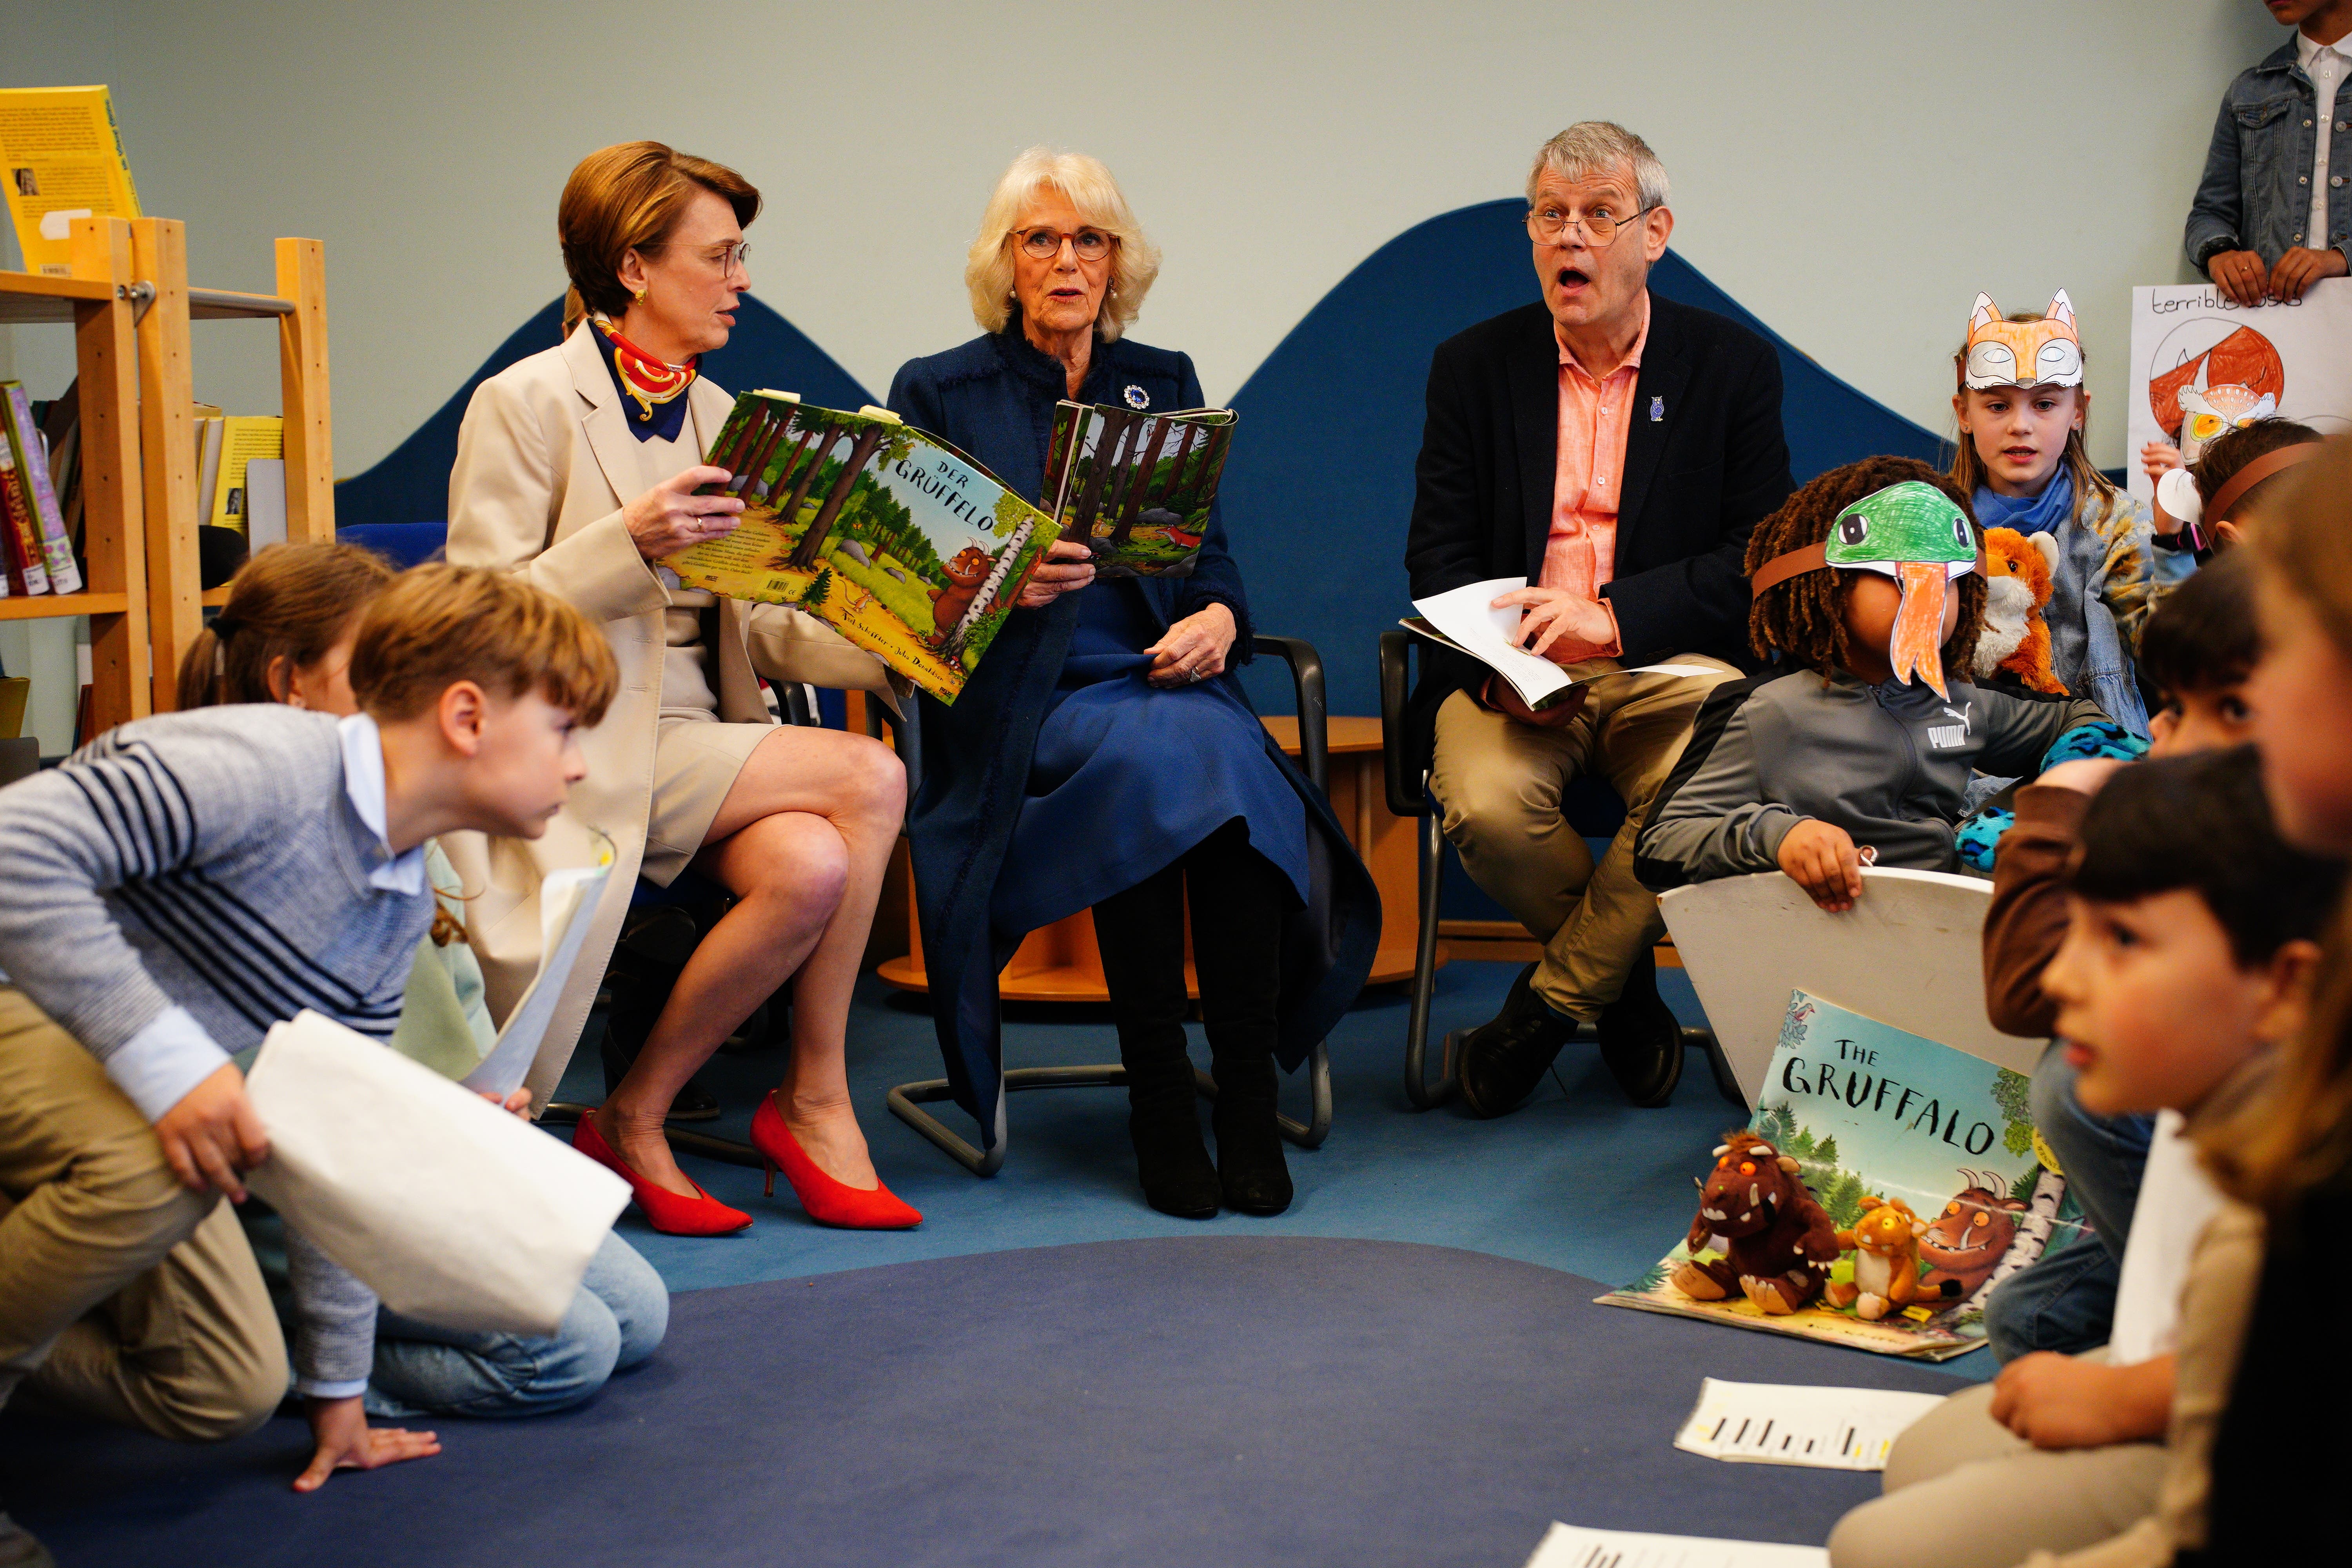 The Queen Consort reading The Gruffalo with Axel Scheffler, right, the illustrator of the children’s book during a visit to Rudolf Ross Grundschule School, Hamburg, to hear about the immersive language learning methods the school offers to its students (Ben Birchall/PA)